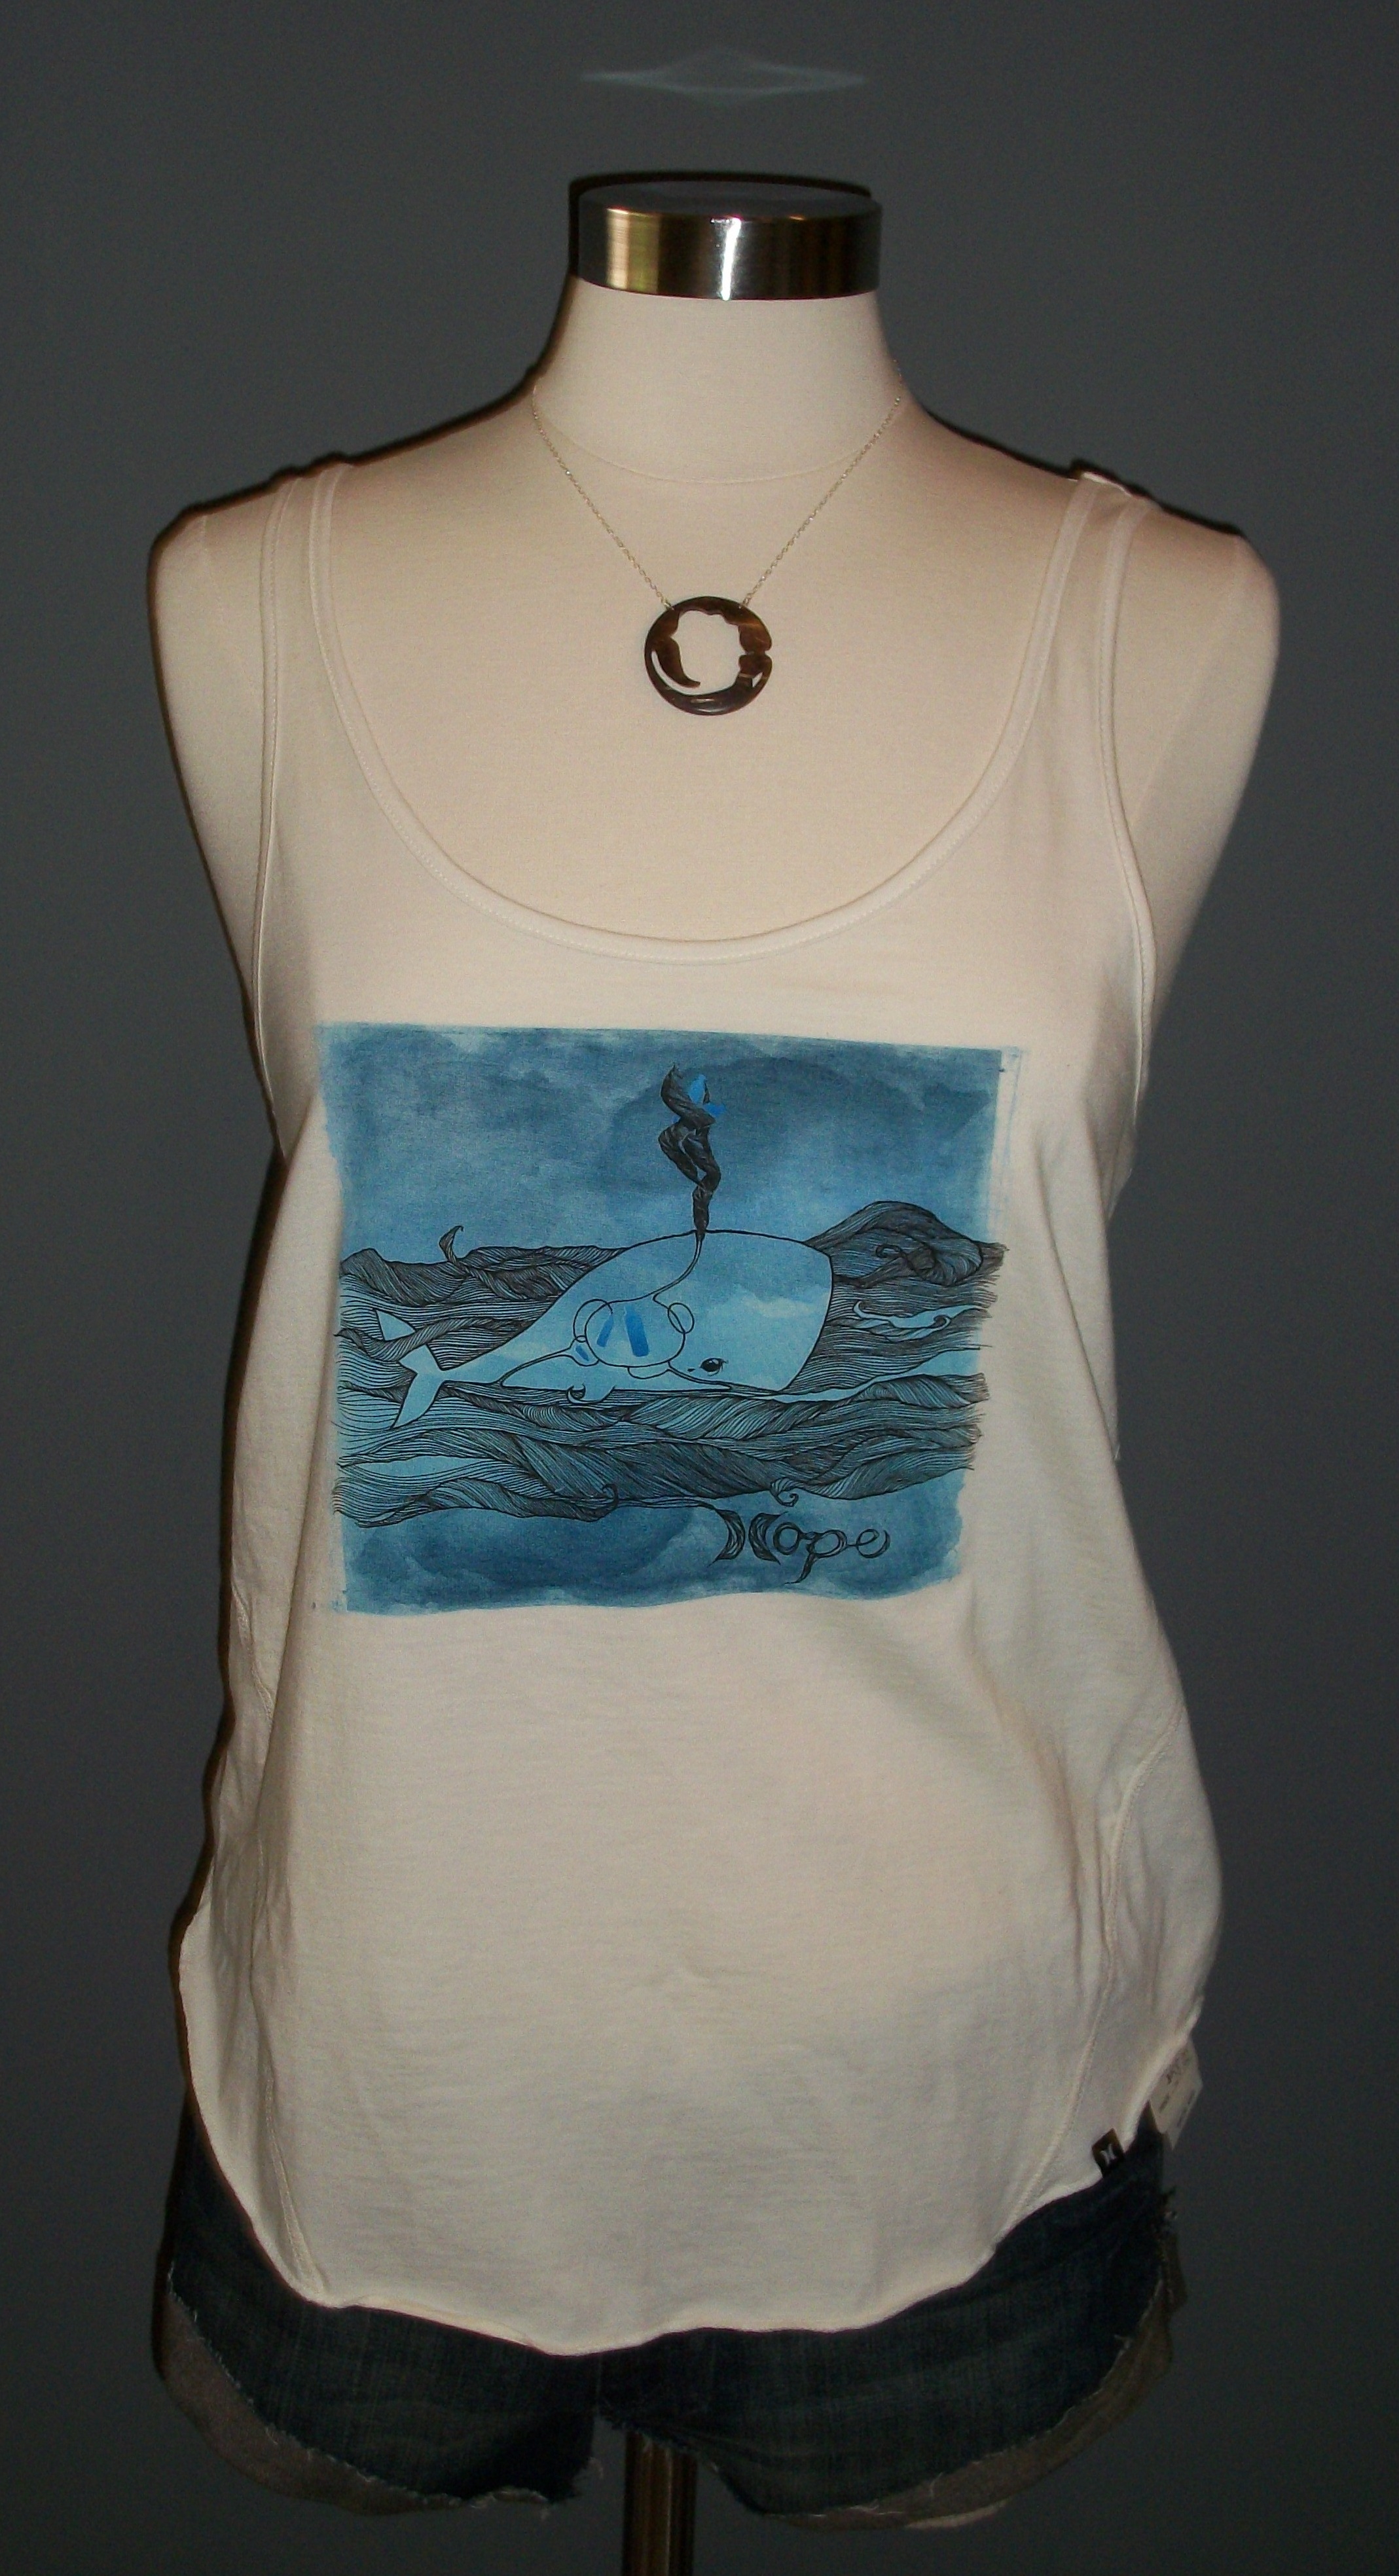 We also have a tank that was designed by Brandon Boydyup the dreamy lead